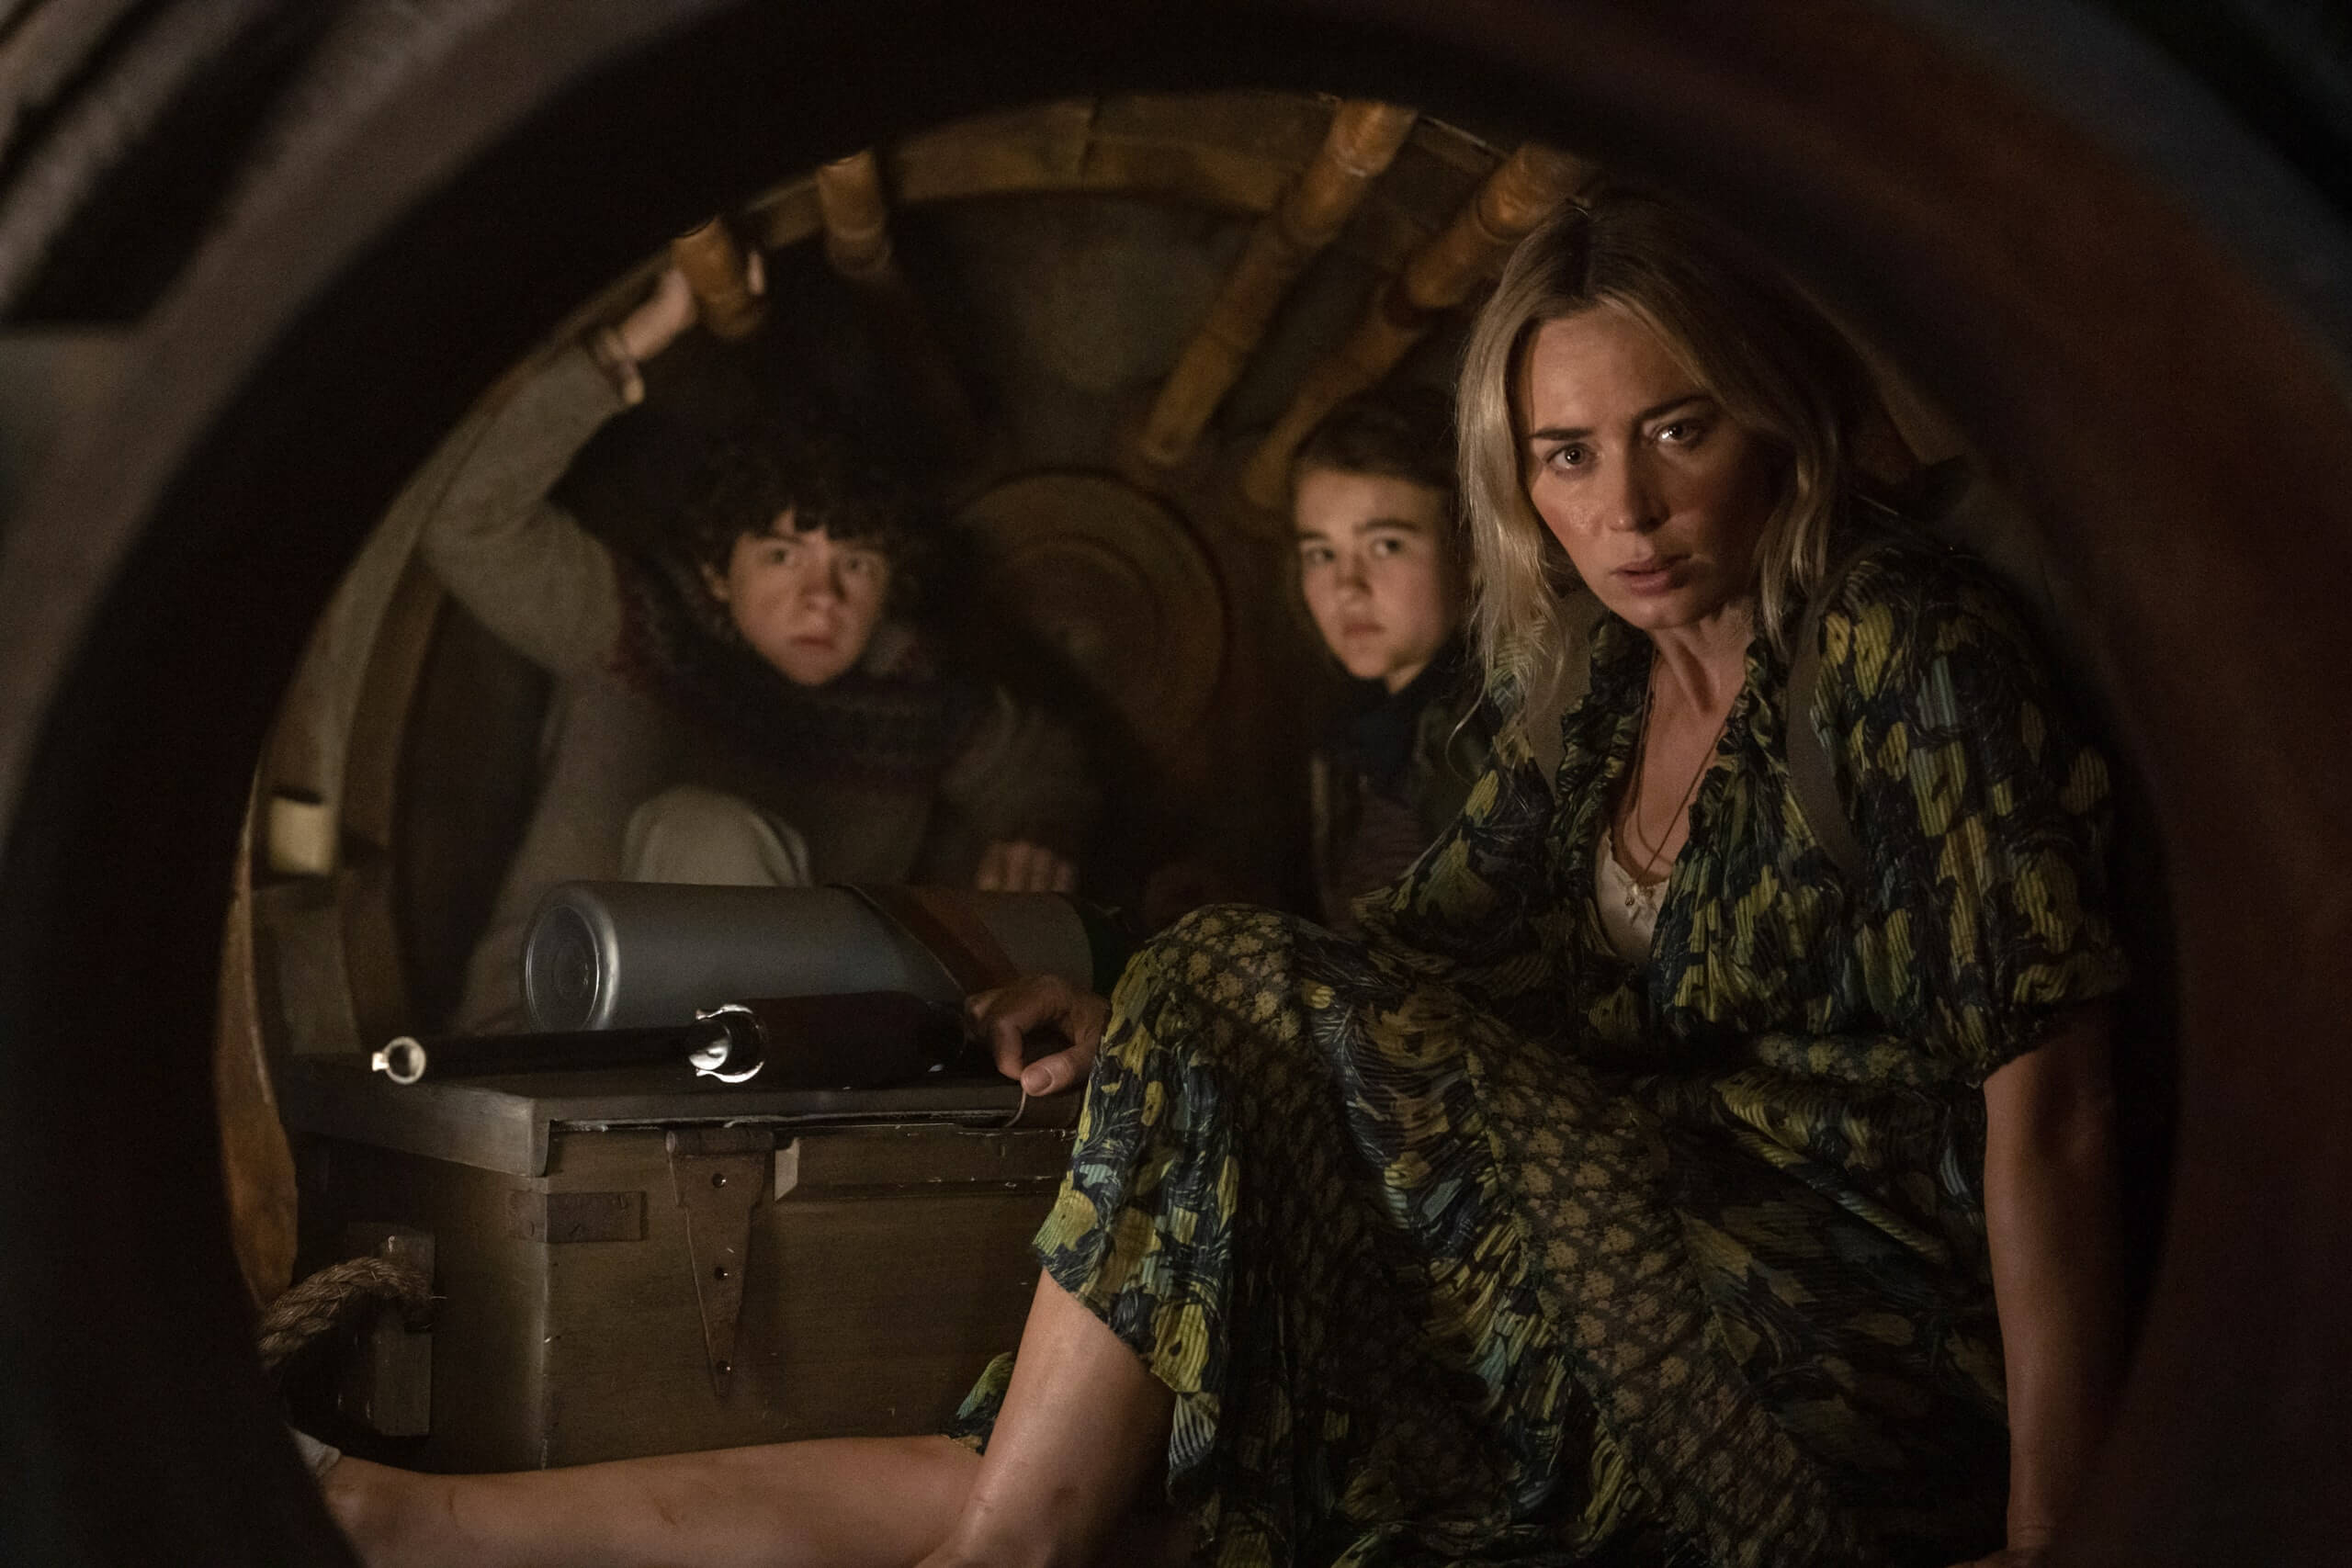 Michael Sarnoski to direct A Quiet Place 3